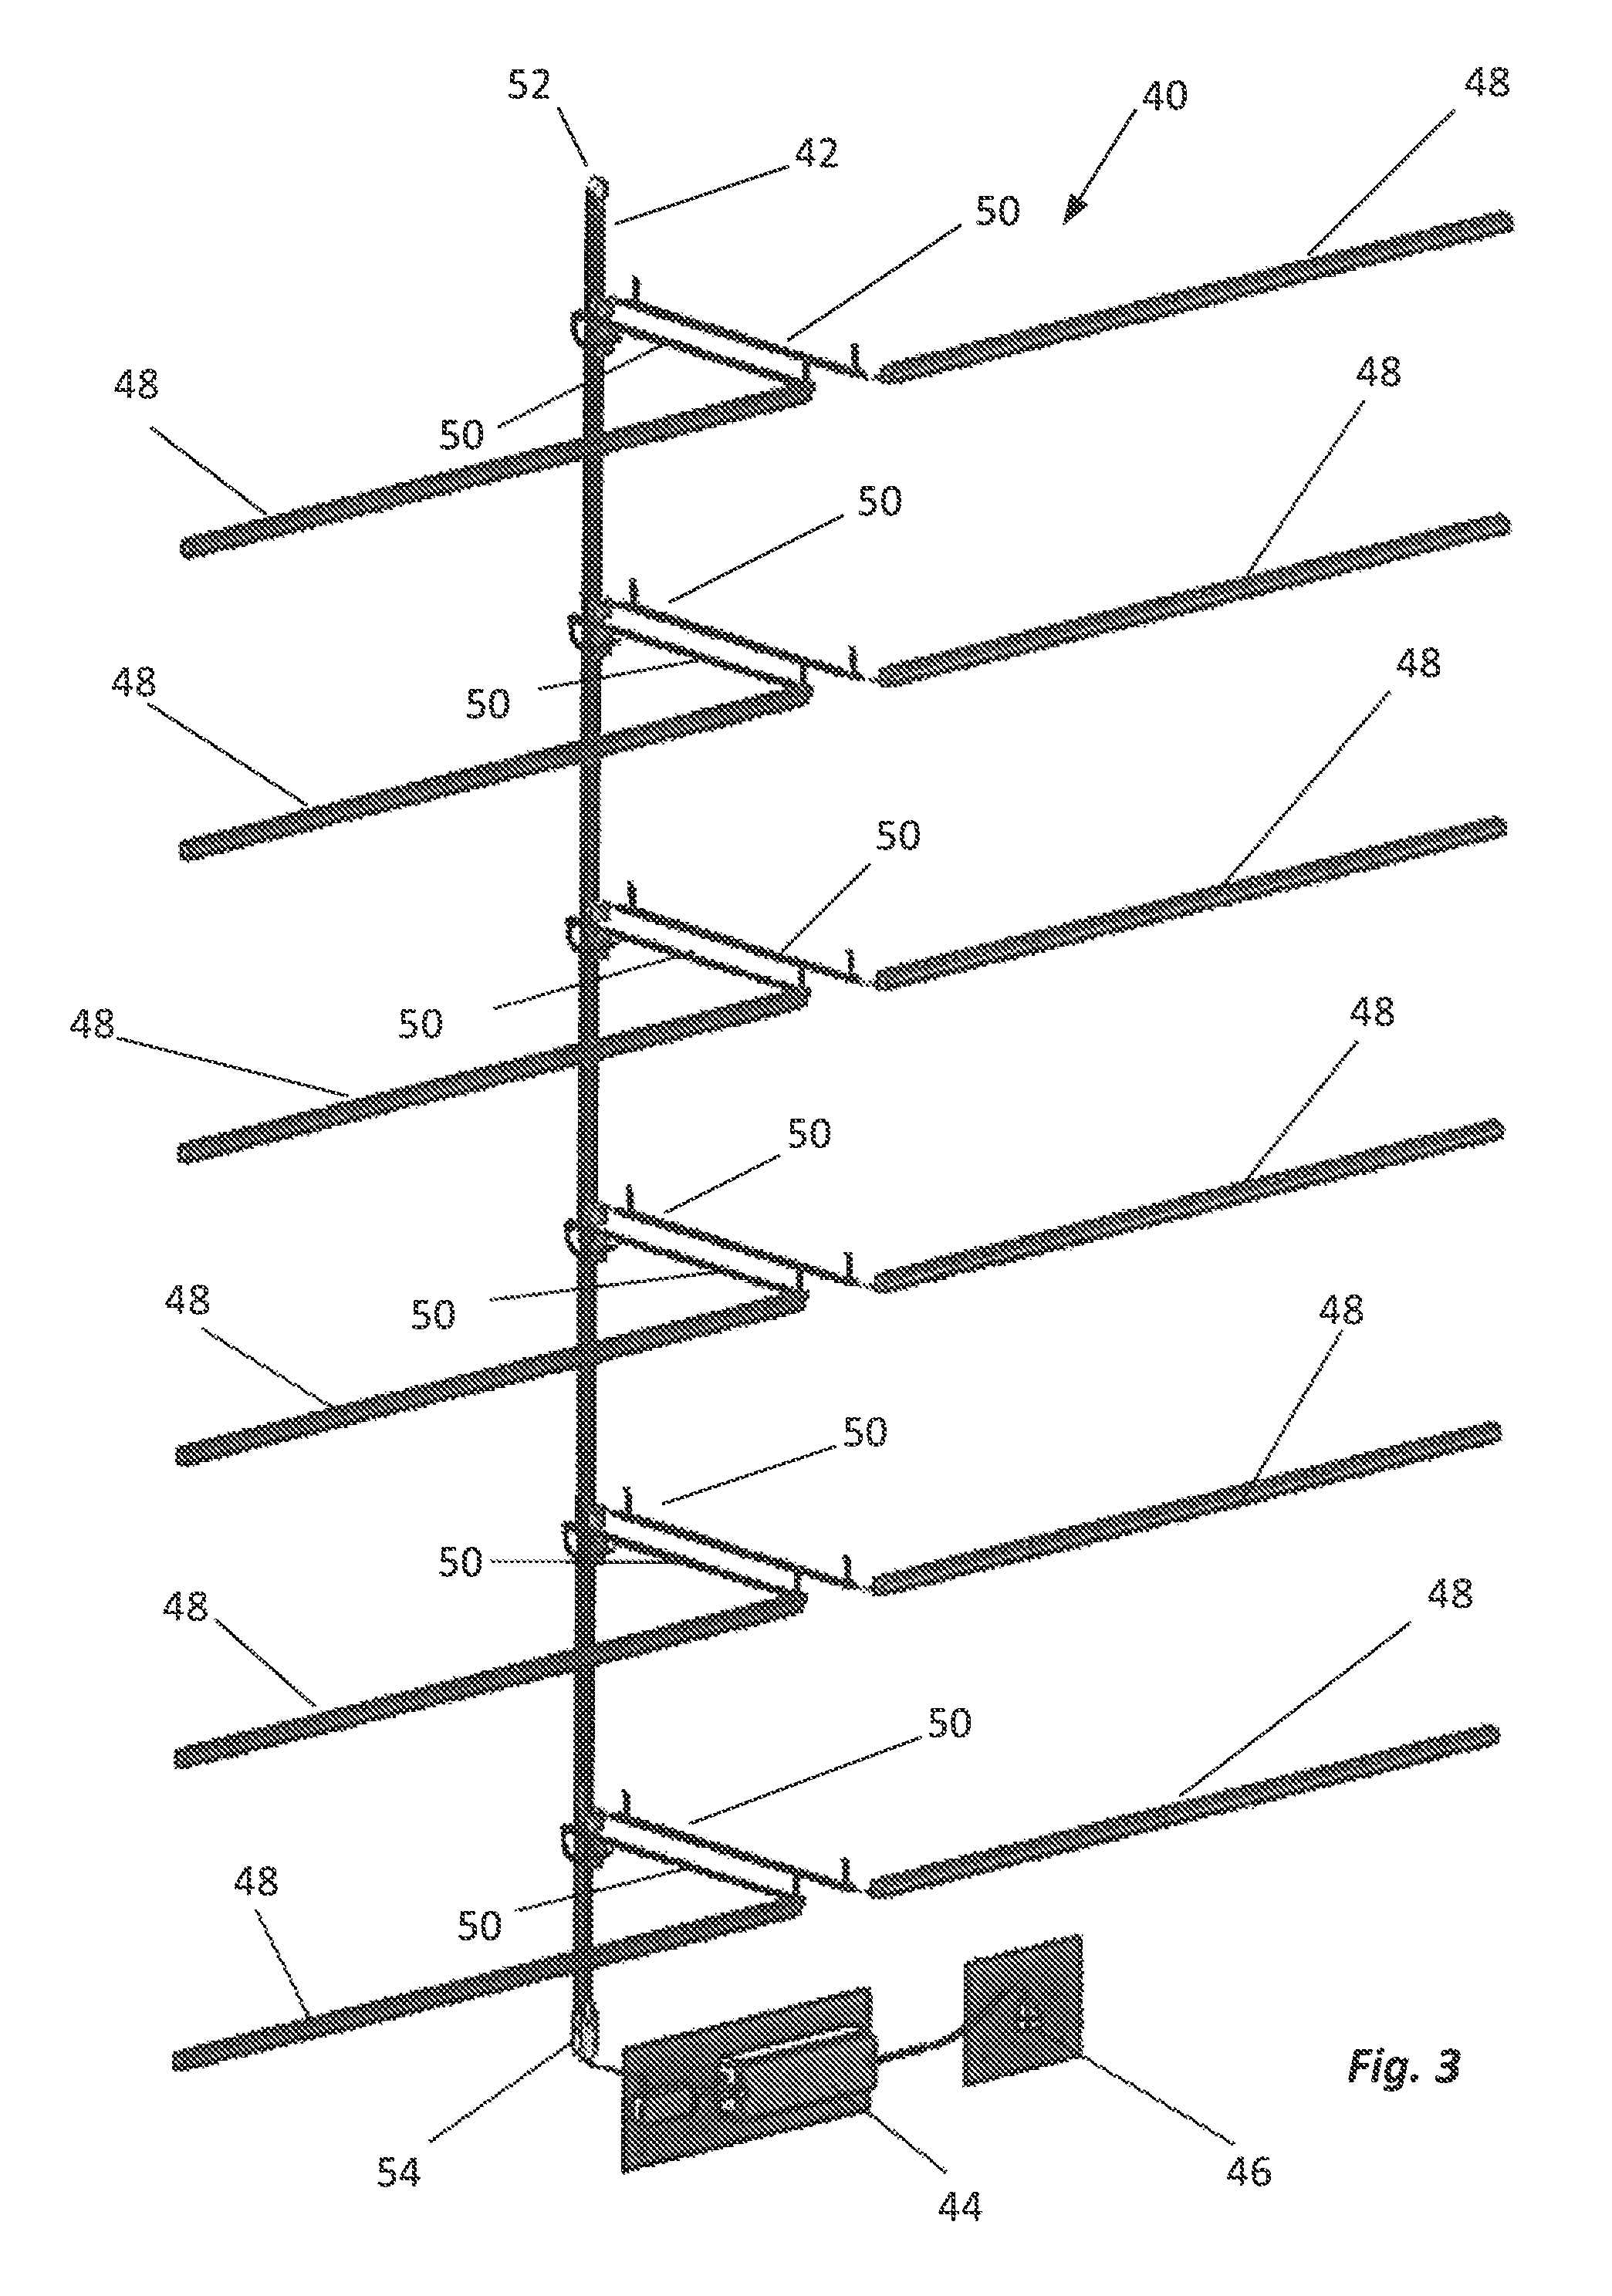 Electrical assembly for connecting components of a lighting system for illuminating store shelving